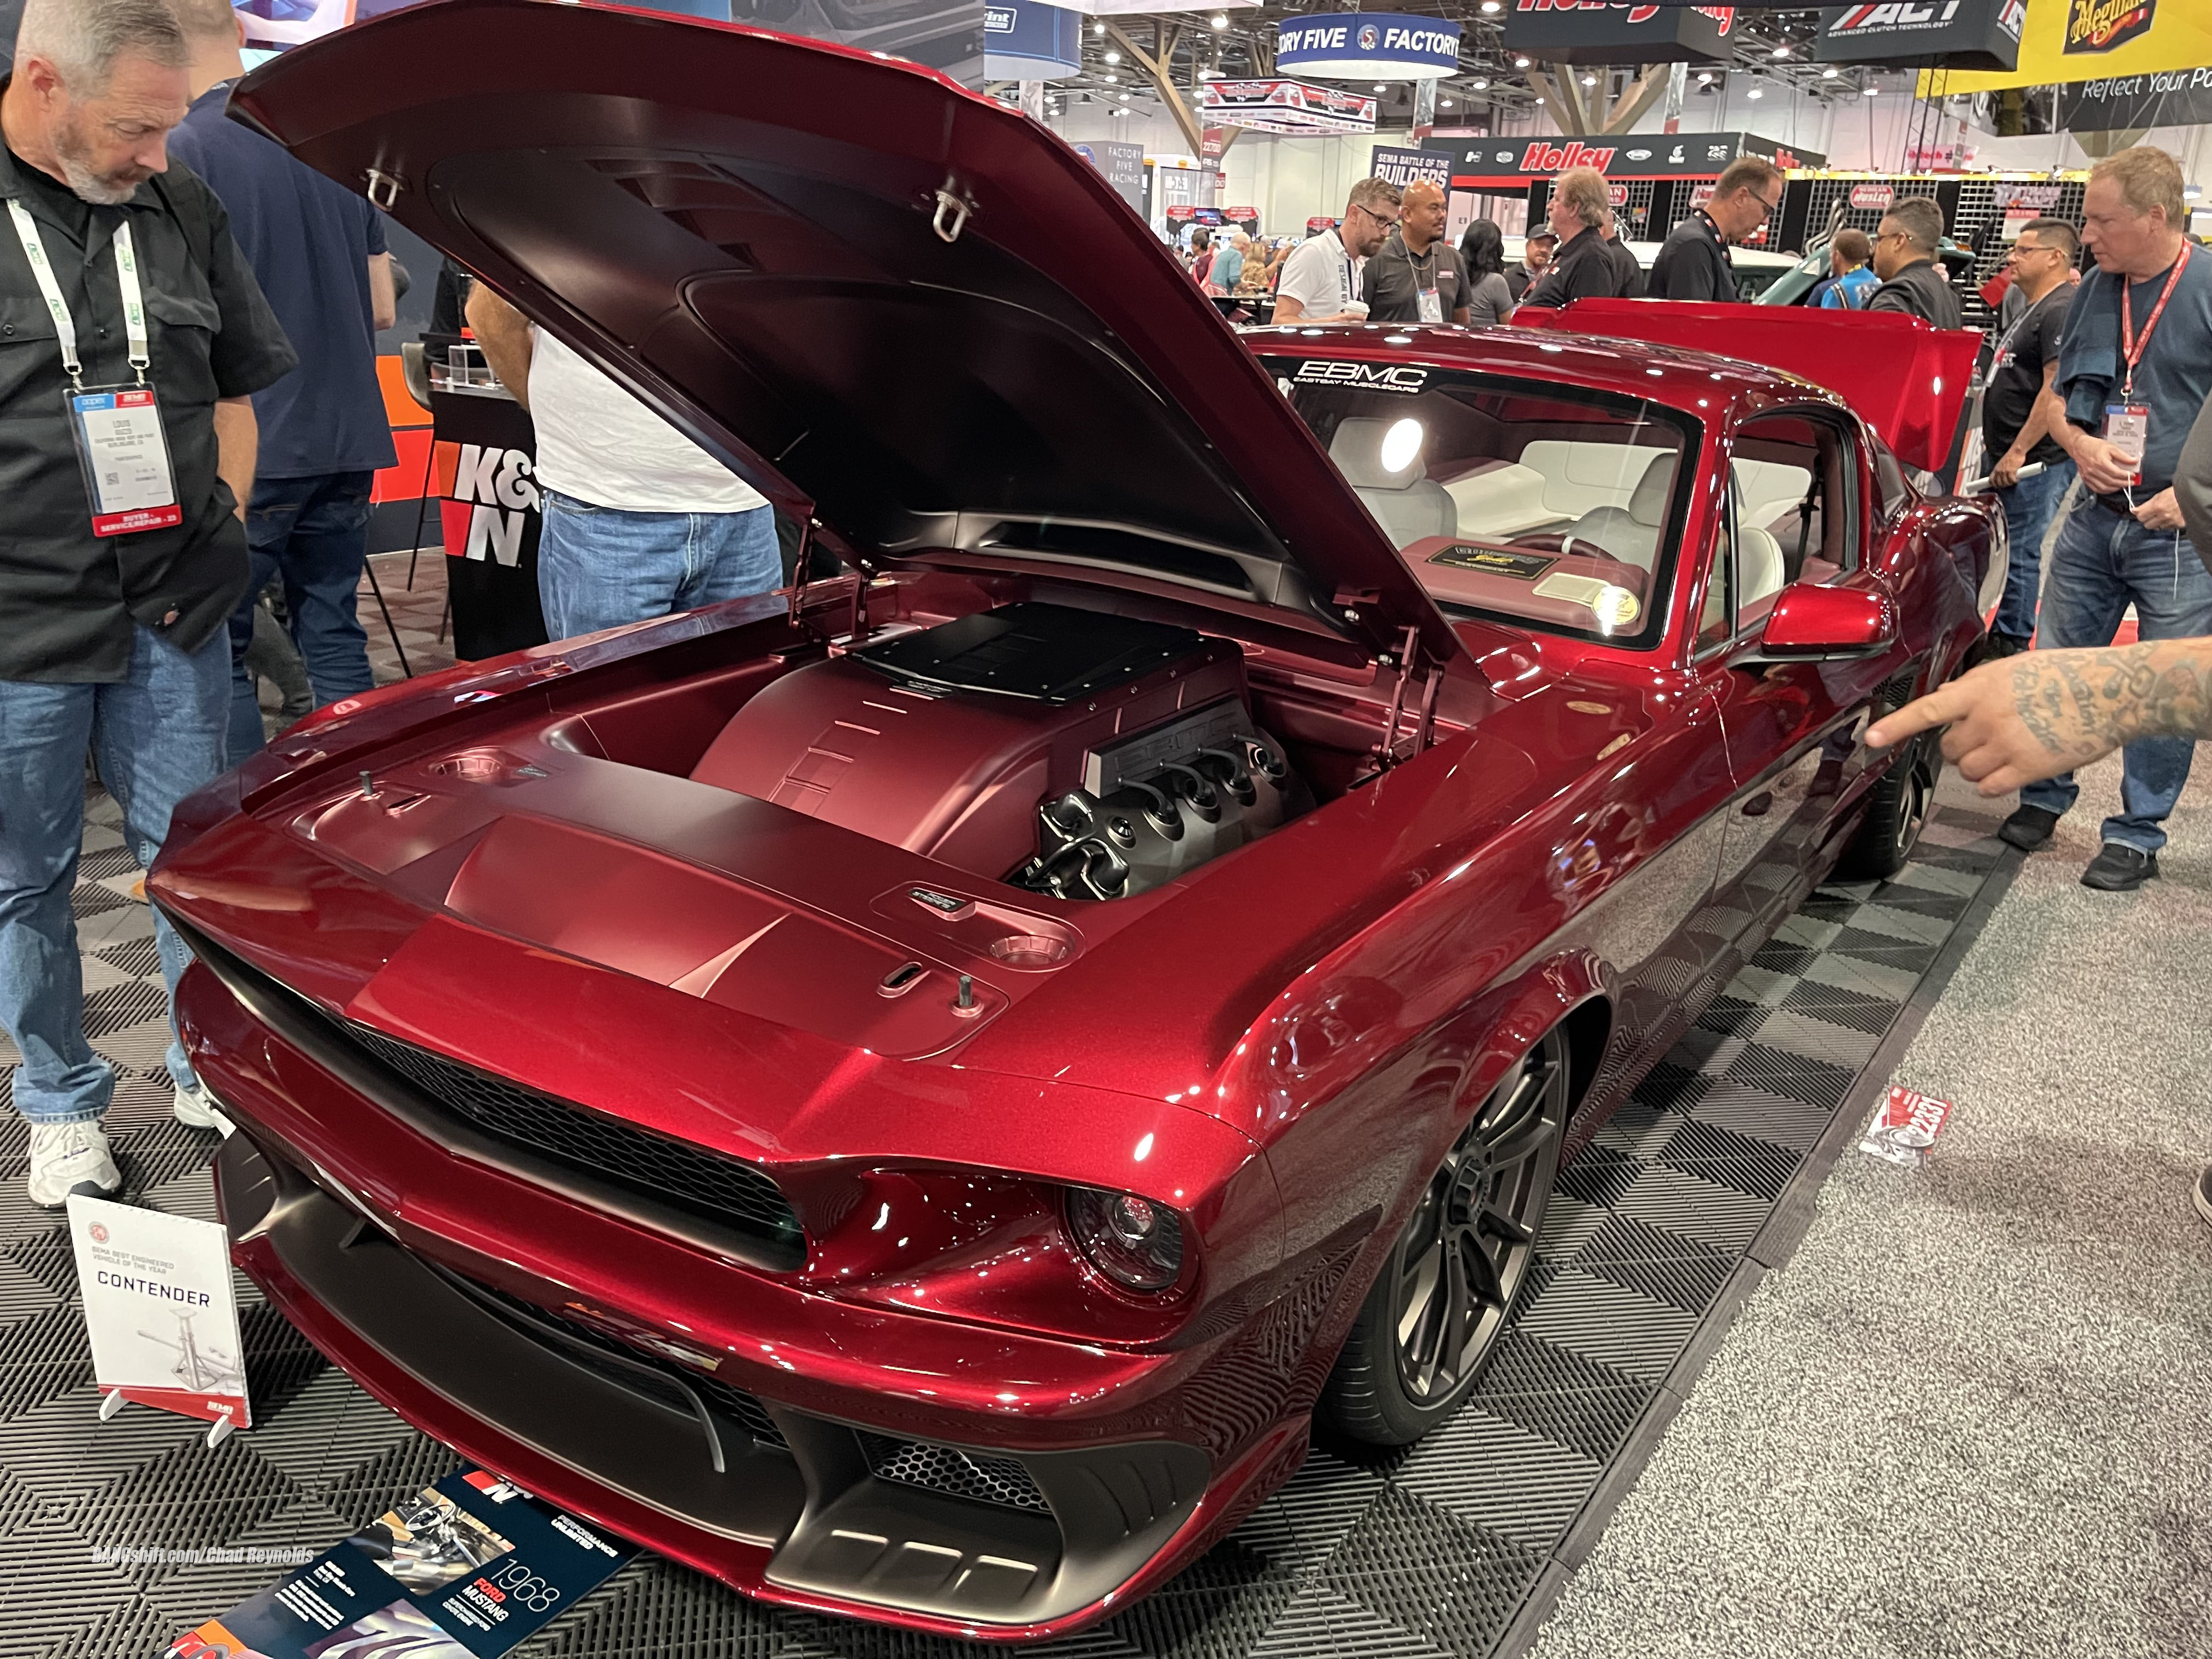 SEMA Show 2023 Photo Coverage: More Automotive Greatness From Las Vegas! Check Out All The Cars From The Aftermarket Show Of The Year!